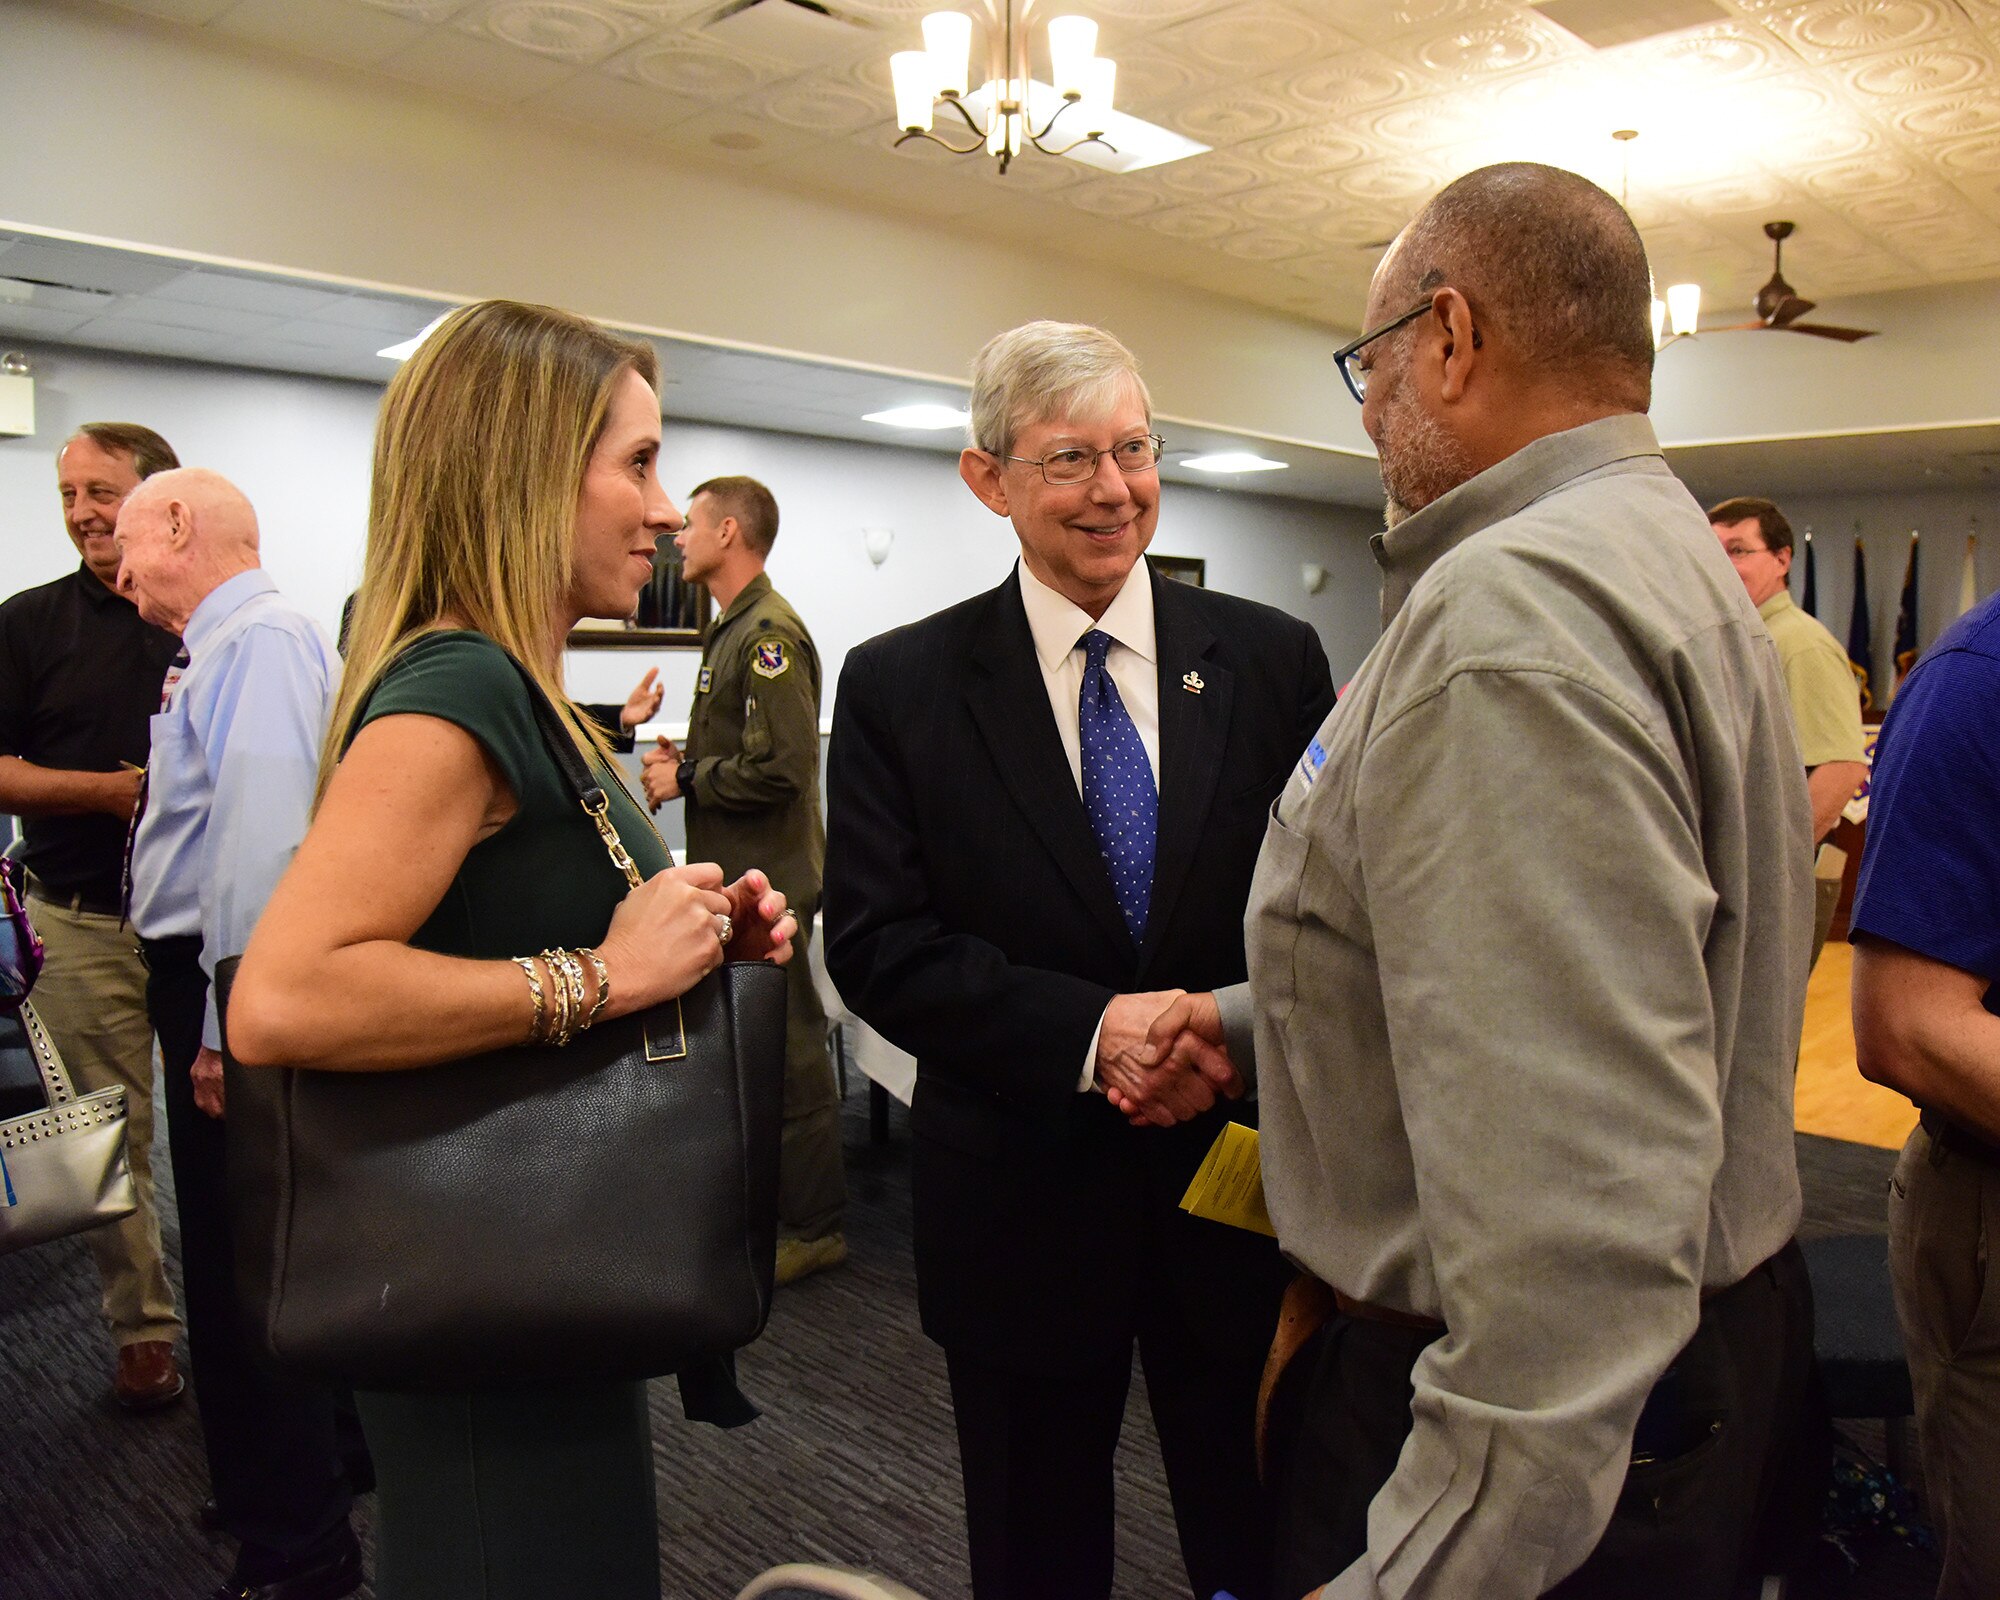 Mr. Dwight Dyess, civilian aide to the Secretary of the Army for Mississippi, Ms. Jennifer Woodruff, West Point BancorpSouth President, and Mr. Greg Stewart, Director of Development at Aurora Flight Science, attended the quarterly Base Community Council meeting Sept. 10, 2019 on Columbus Air Force Base, Miss. (U.S. Air Force photo by Elizabeth Owens)